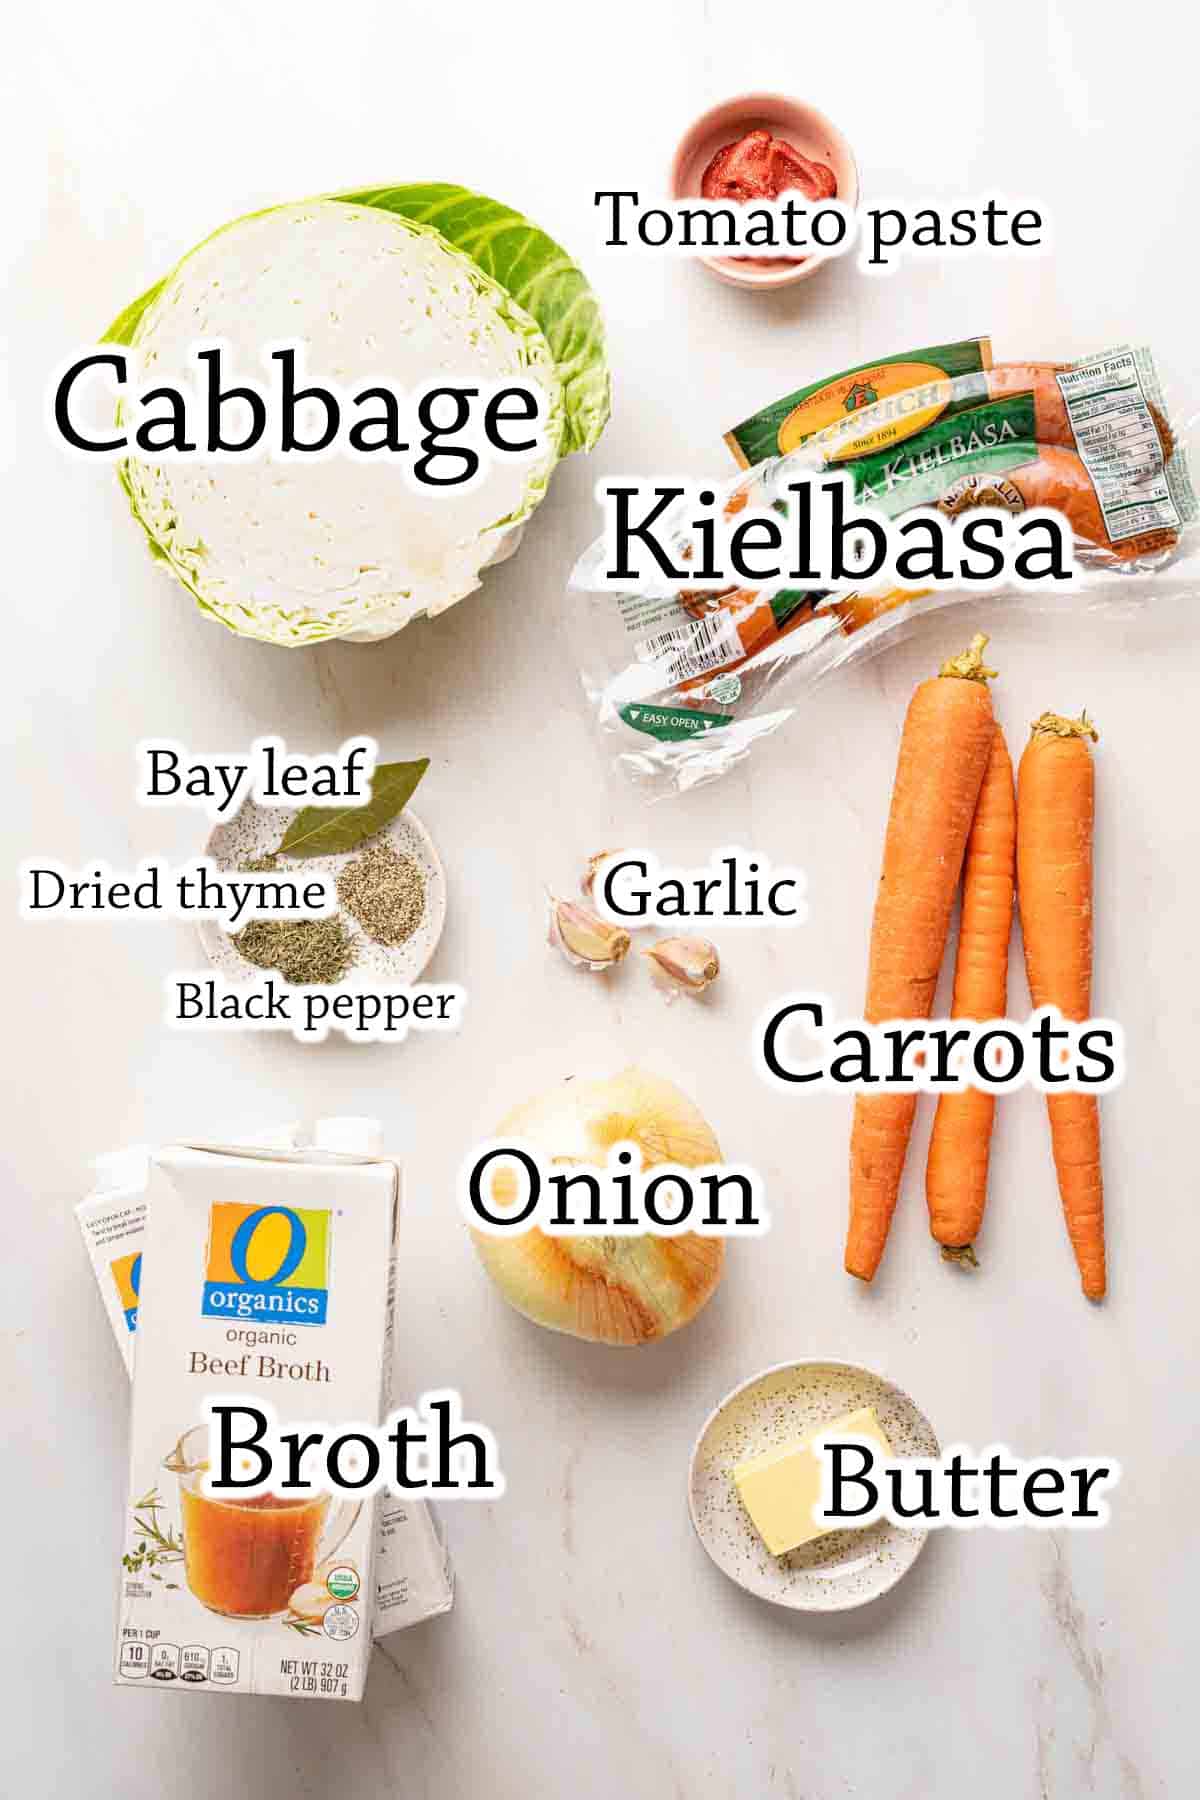 recipe ingredients for cabbage and sausage soup with text labels.